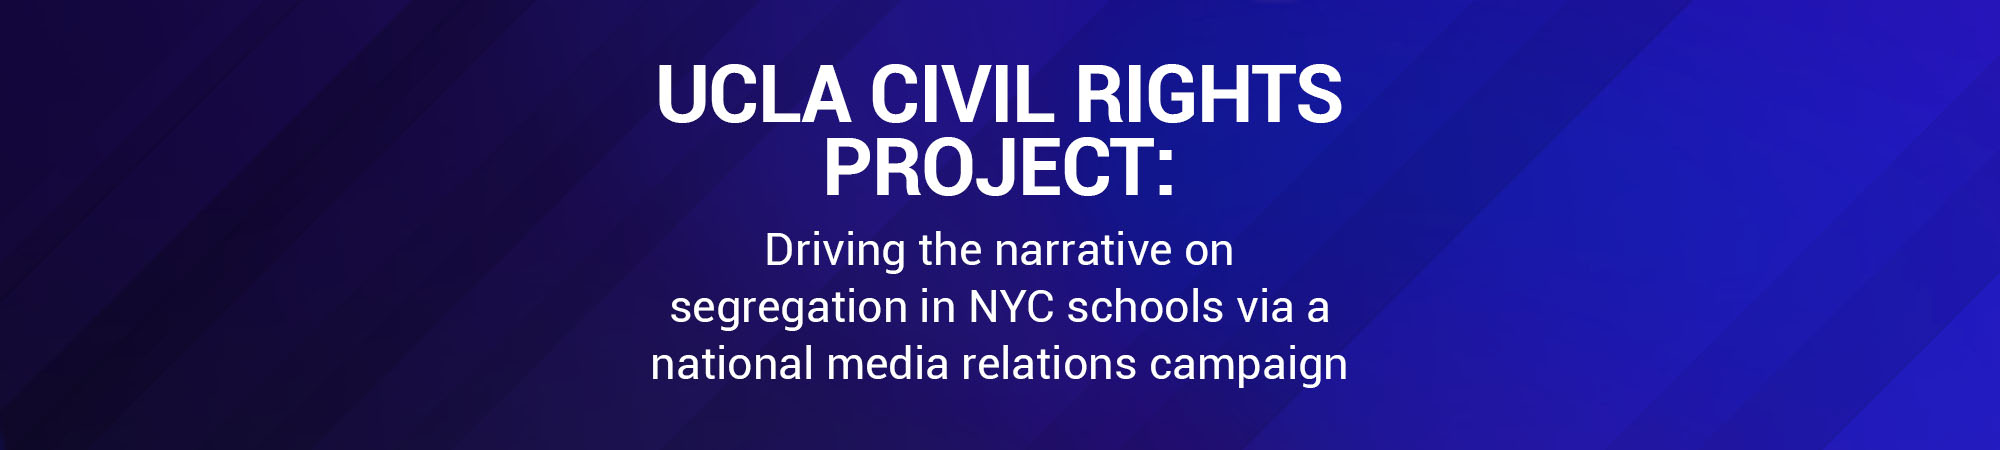 Media relations for the UCLA Civil Rights Project